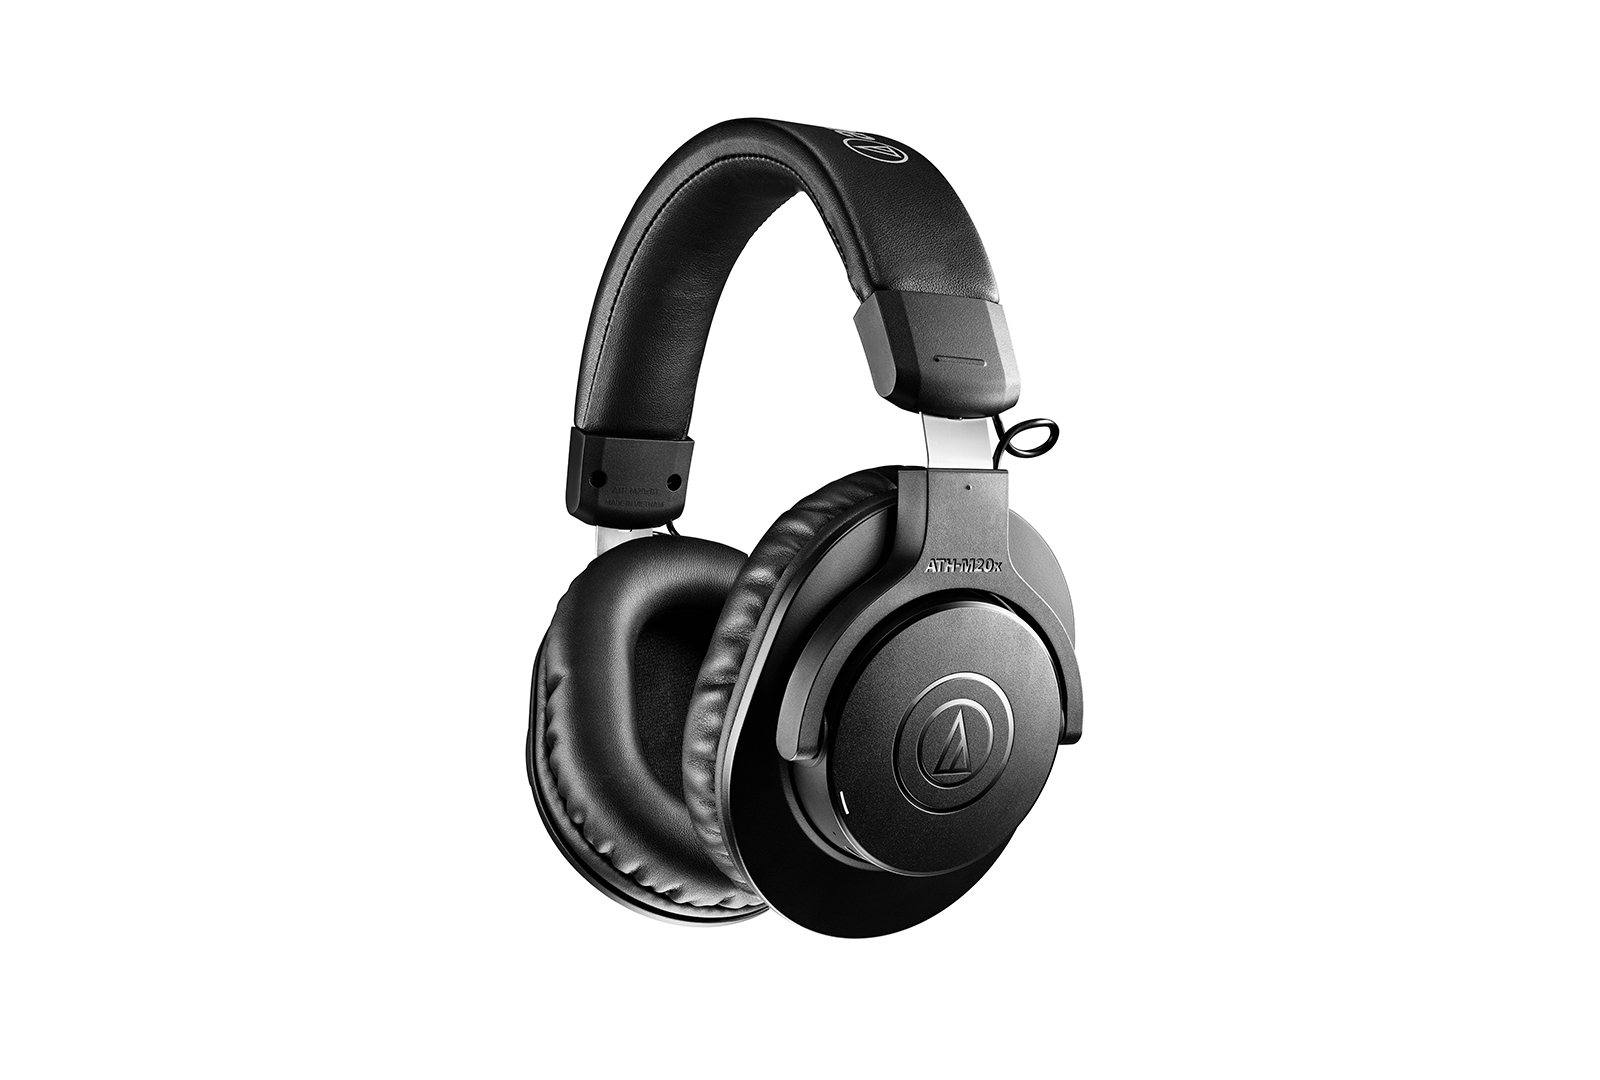 Audio-Technica launches new over-ear headphone, the ATH-M20xBT